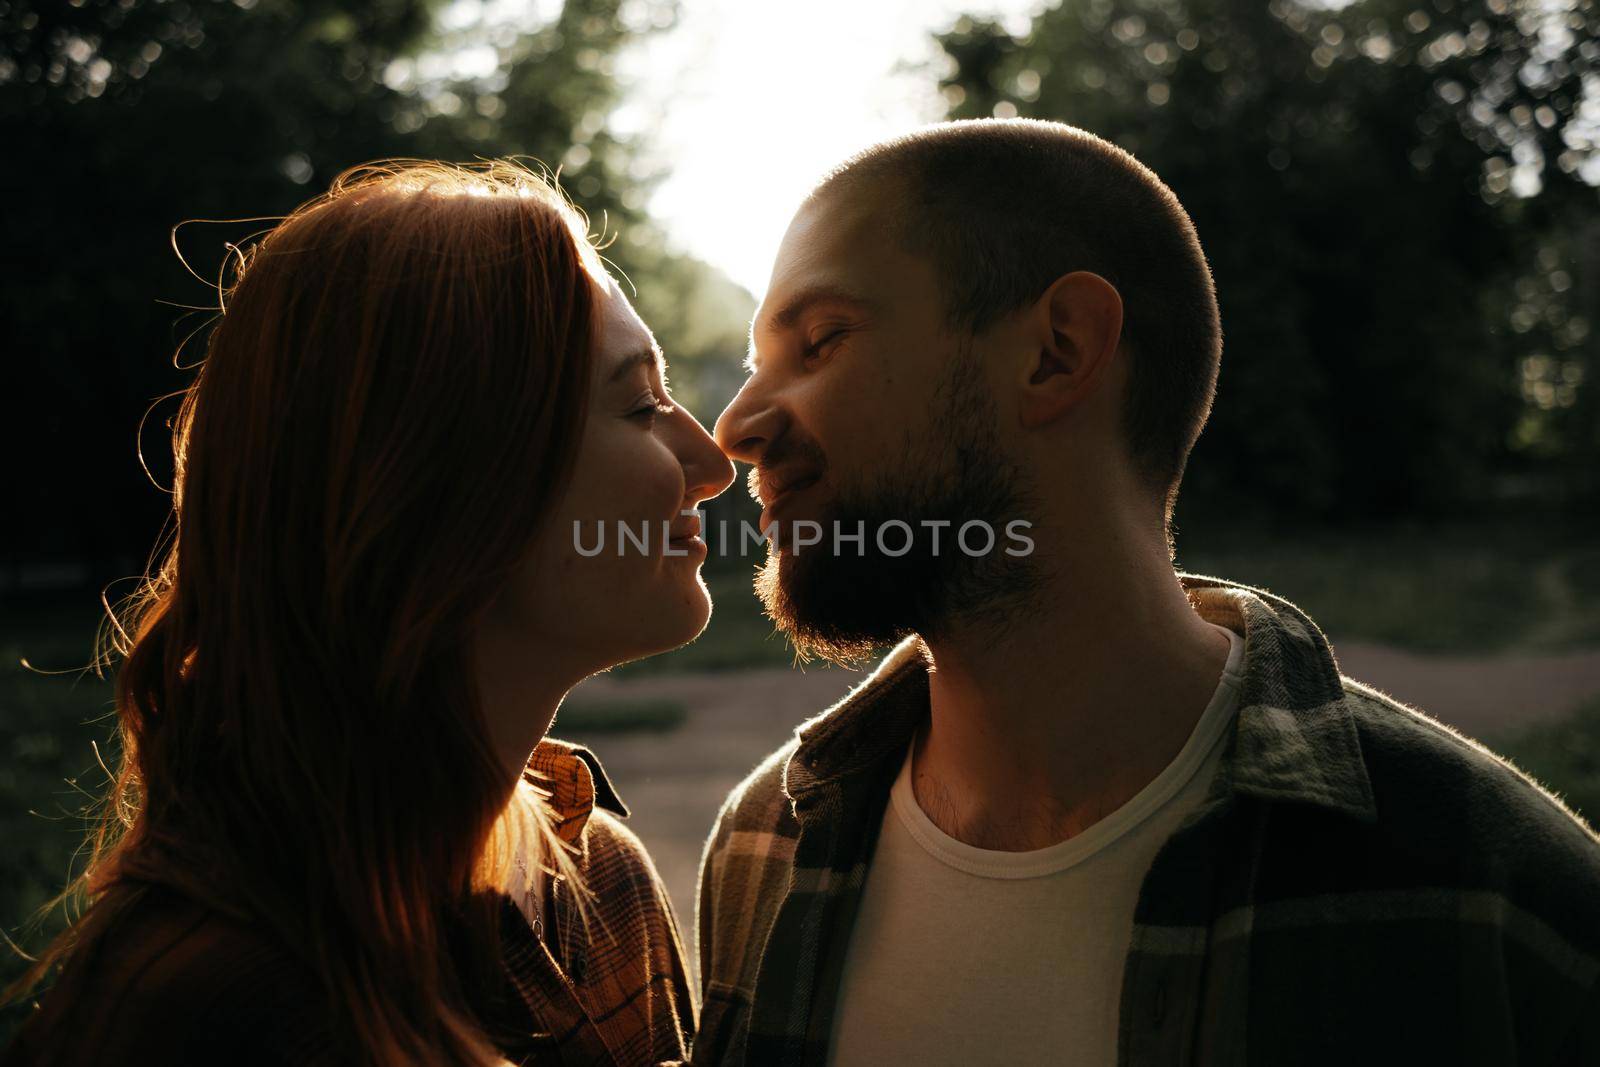 lovers kiss at sunset in the backlight